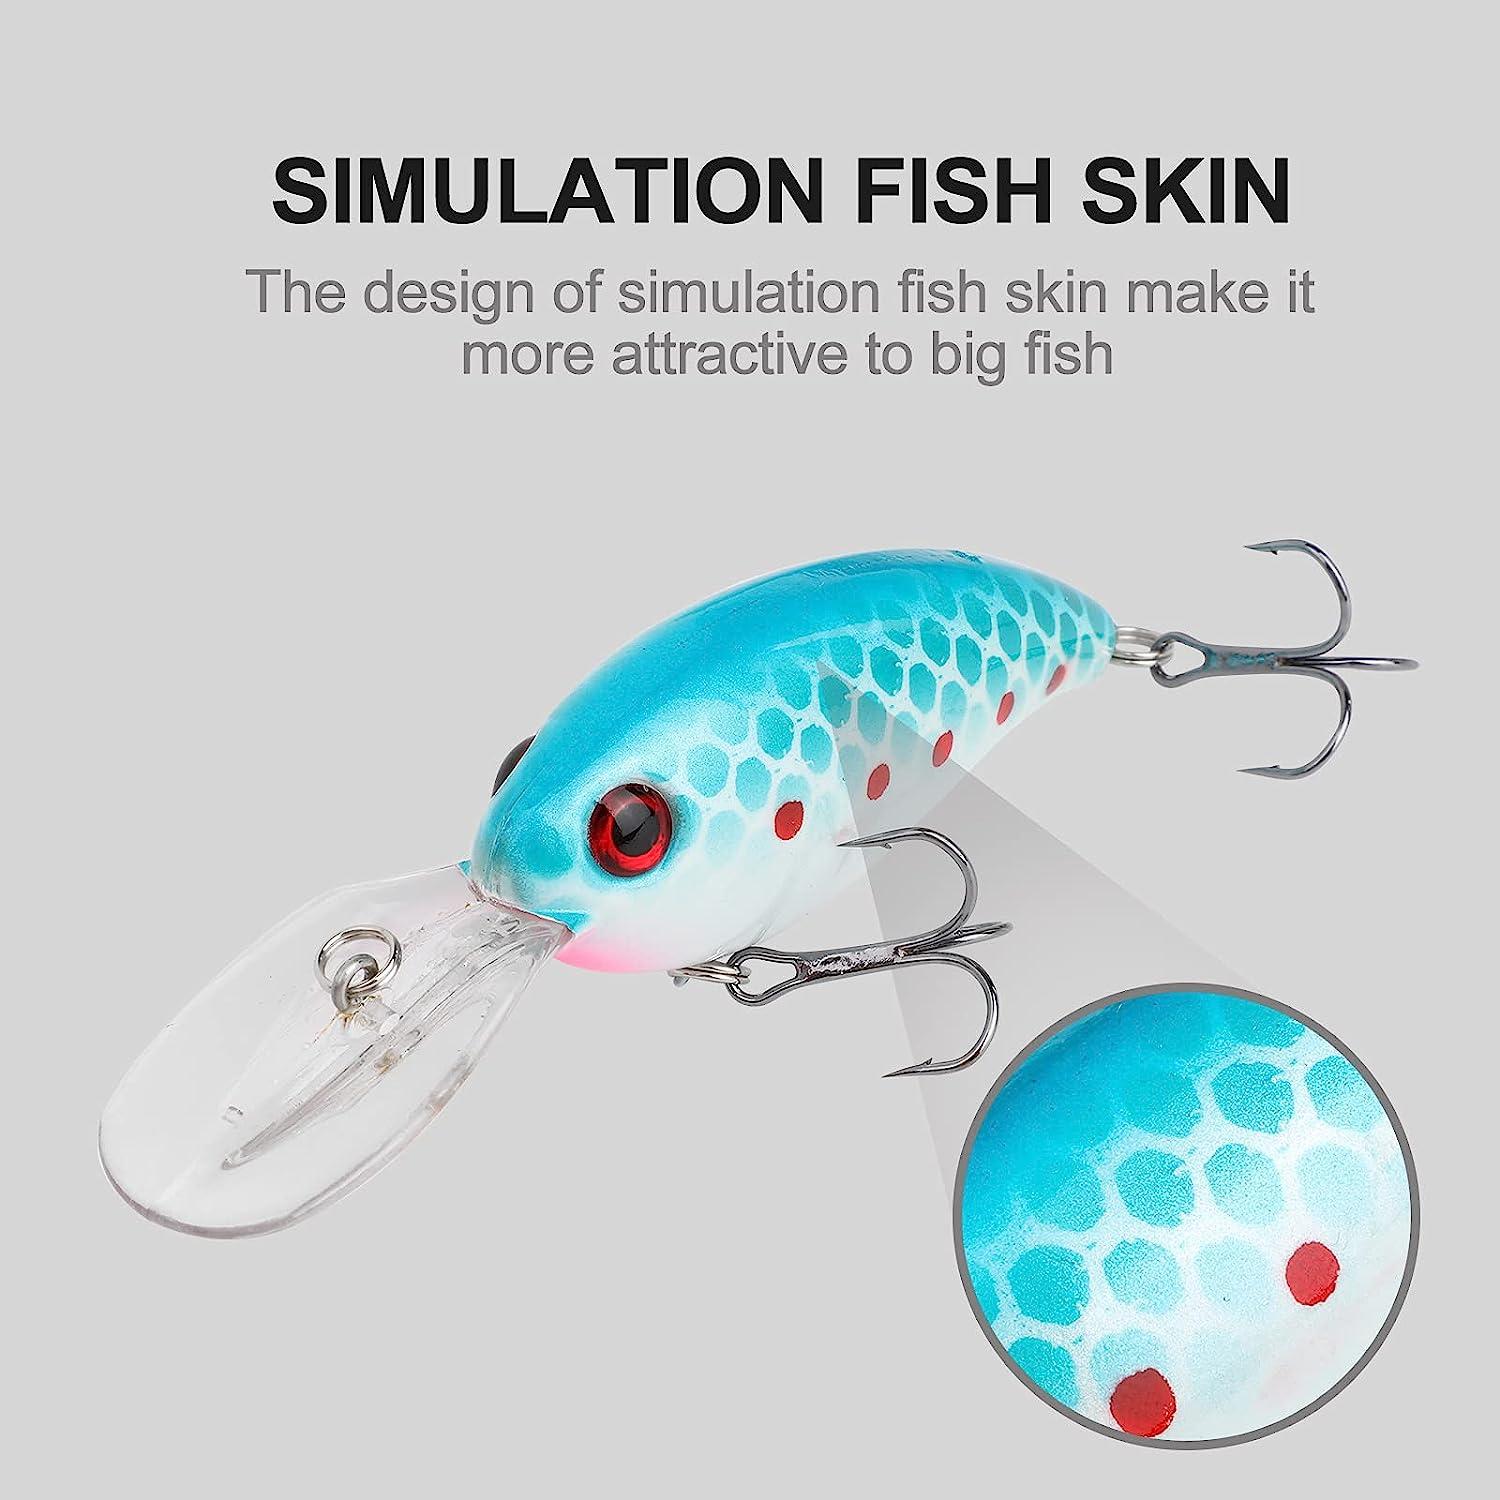 ZWMING Bass Crankbait Fishing Lures, Diving Fishing Lures